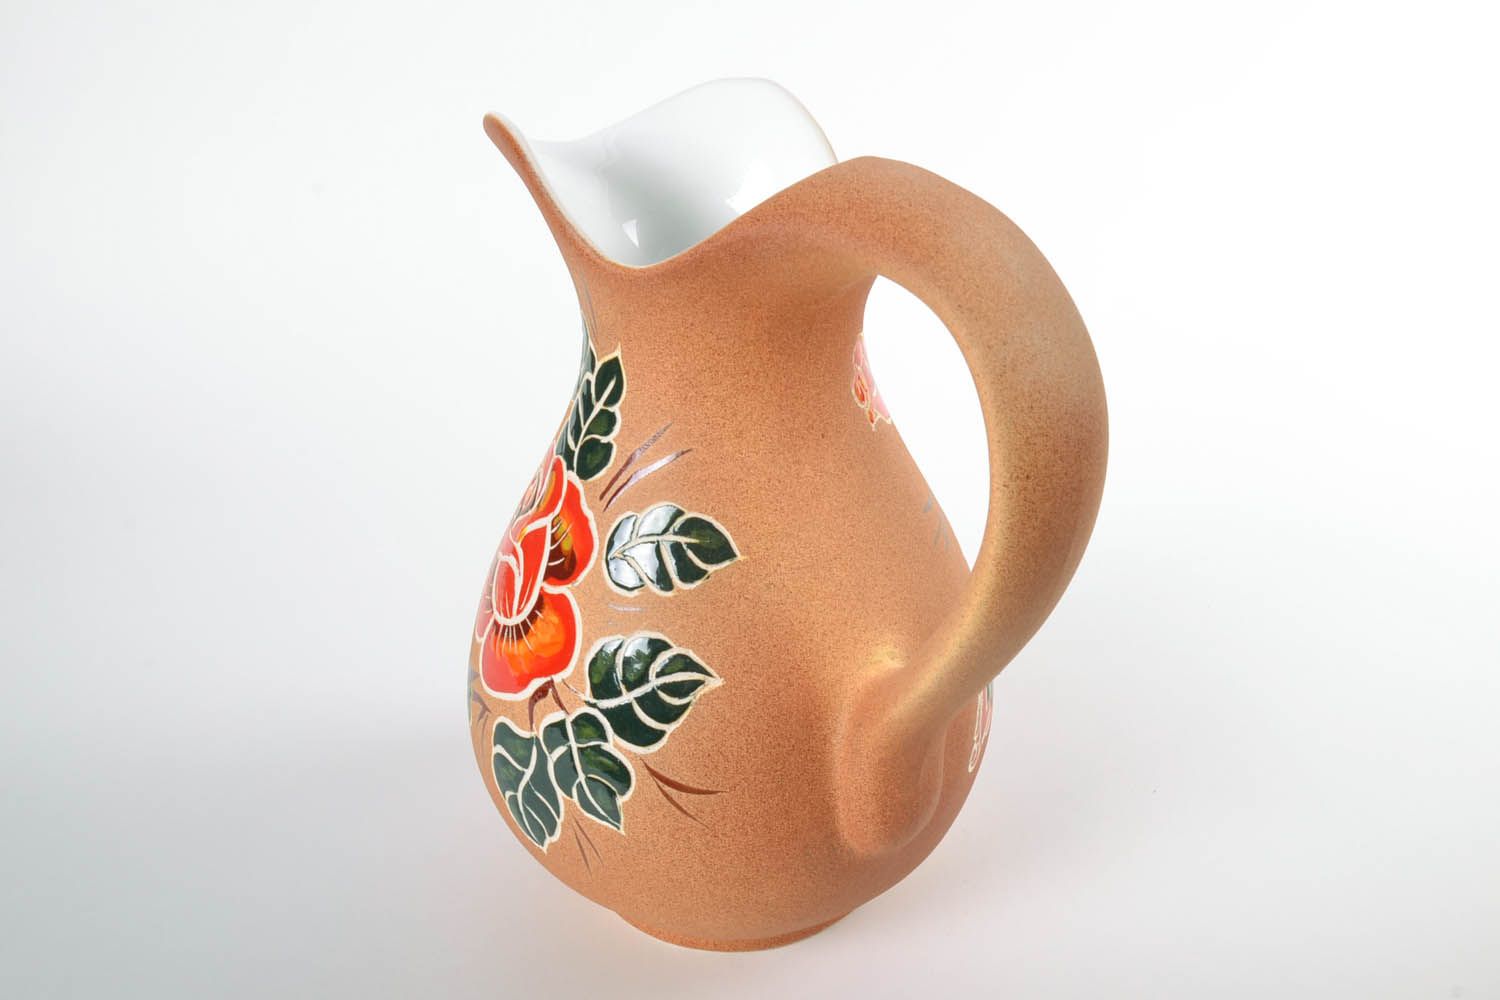 100 oz ceramic water jug with handle and floral design in beige color 4 lb photo 4